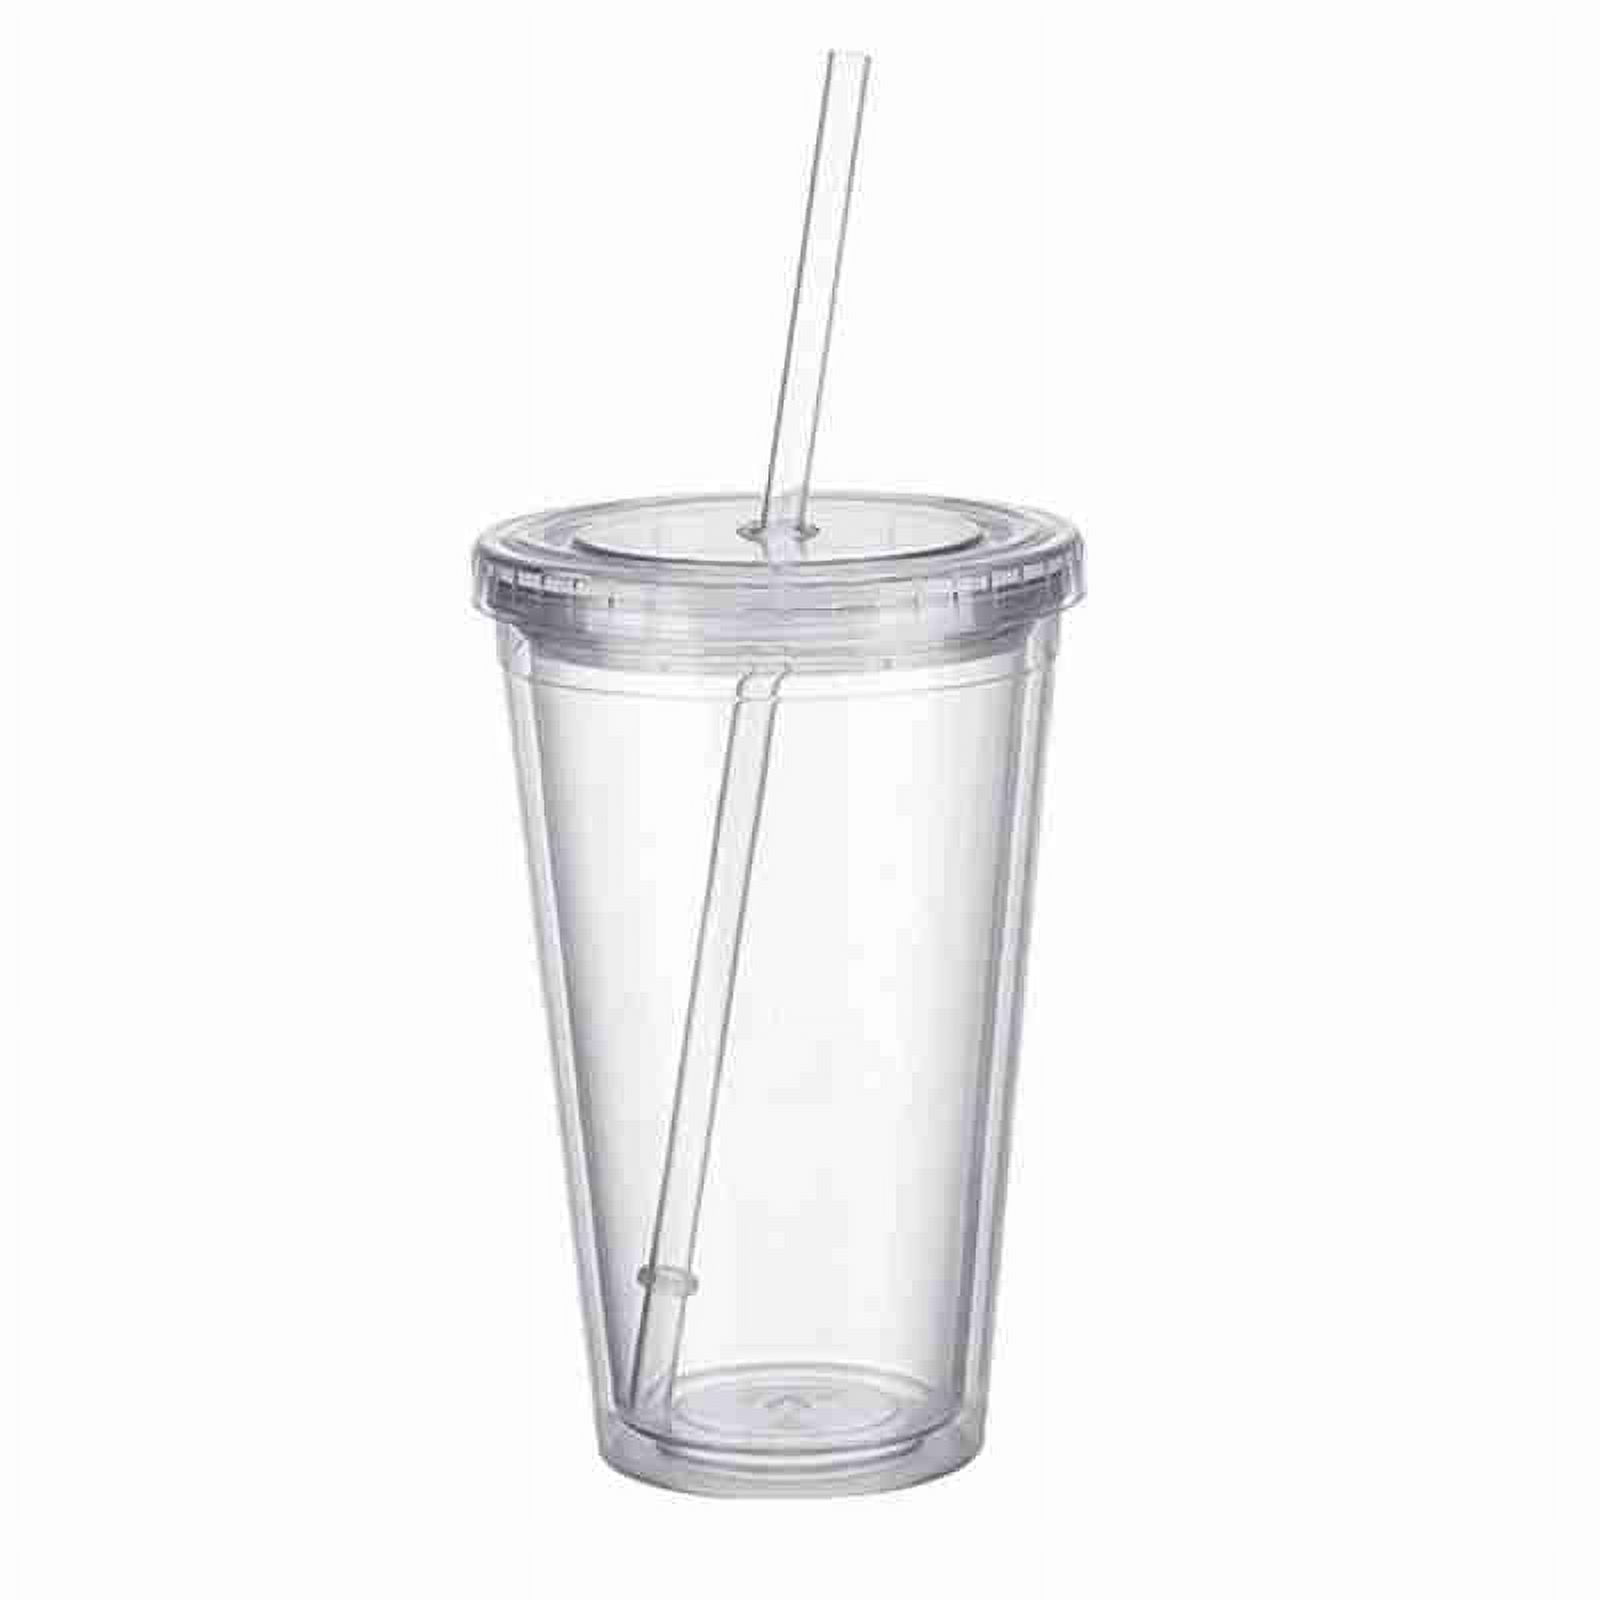 RYUHYF Straw cup, coffee cup, glass with straw and lid, double drink cup,  milk cup, tea cup, ice coffee cup, car cup,set of 1 (16oz, Smoke grey cup